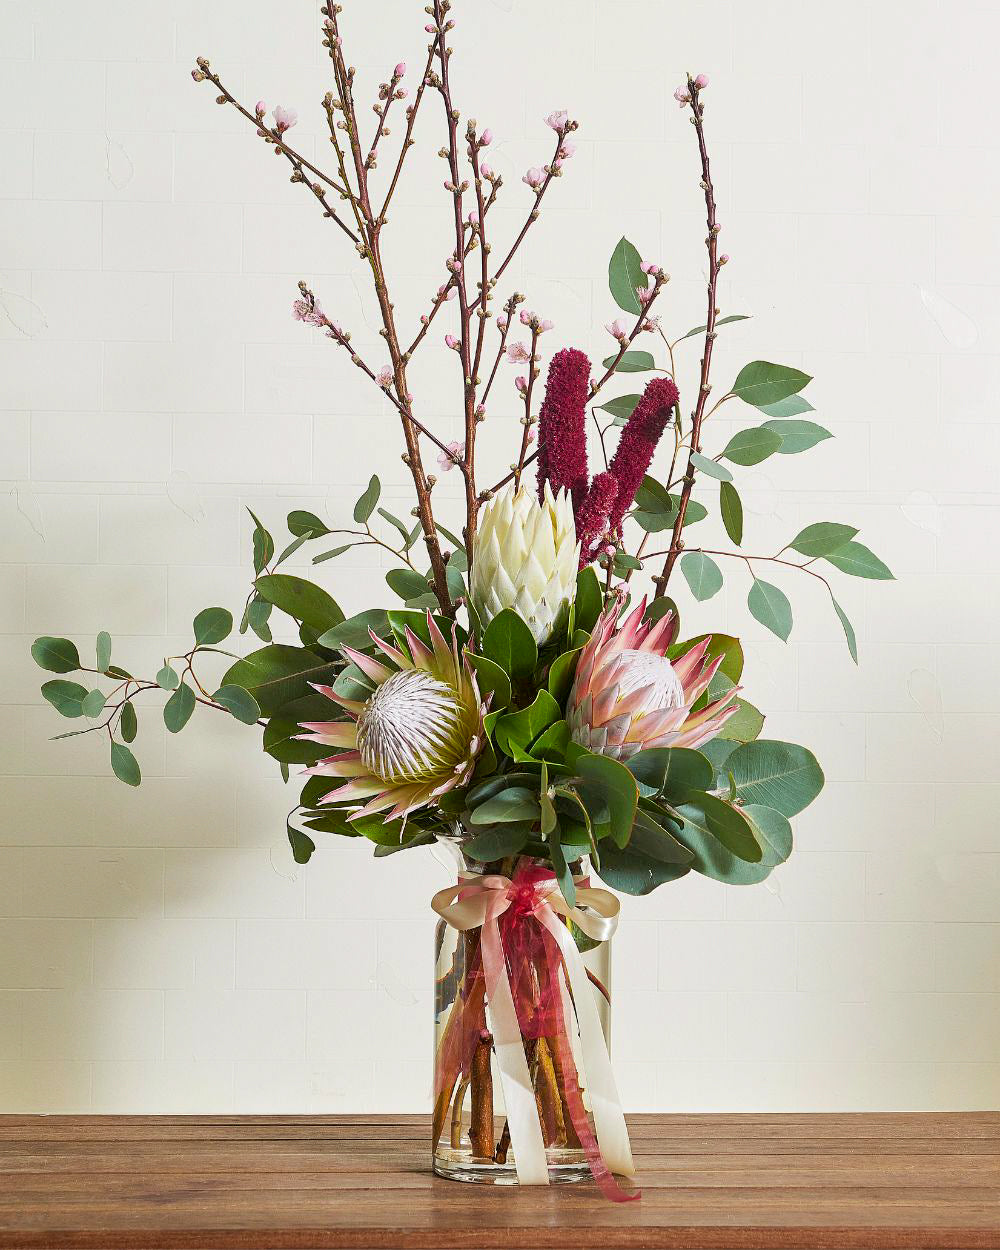 Large, majestic pink King Protea dominates the bouquet, accented by eucalyptus leaves and smaller native blooms.